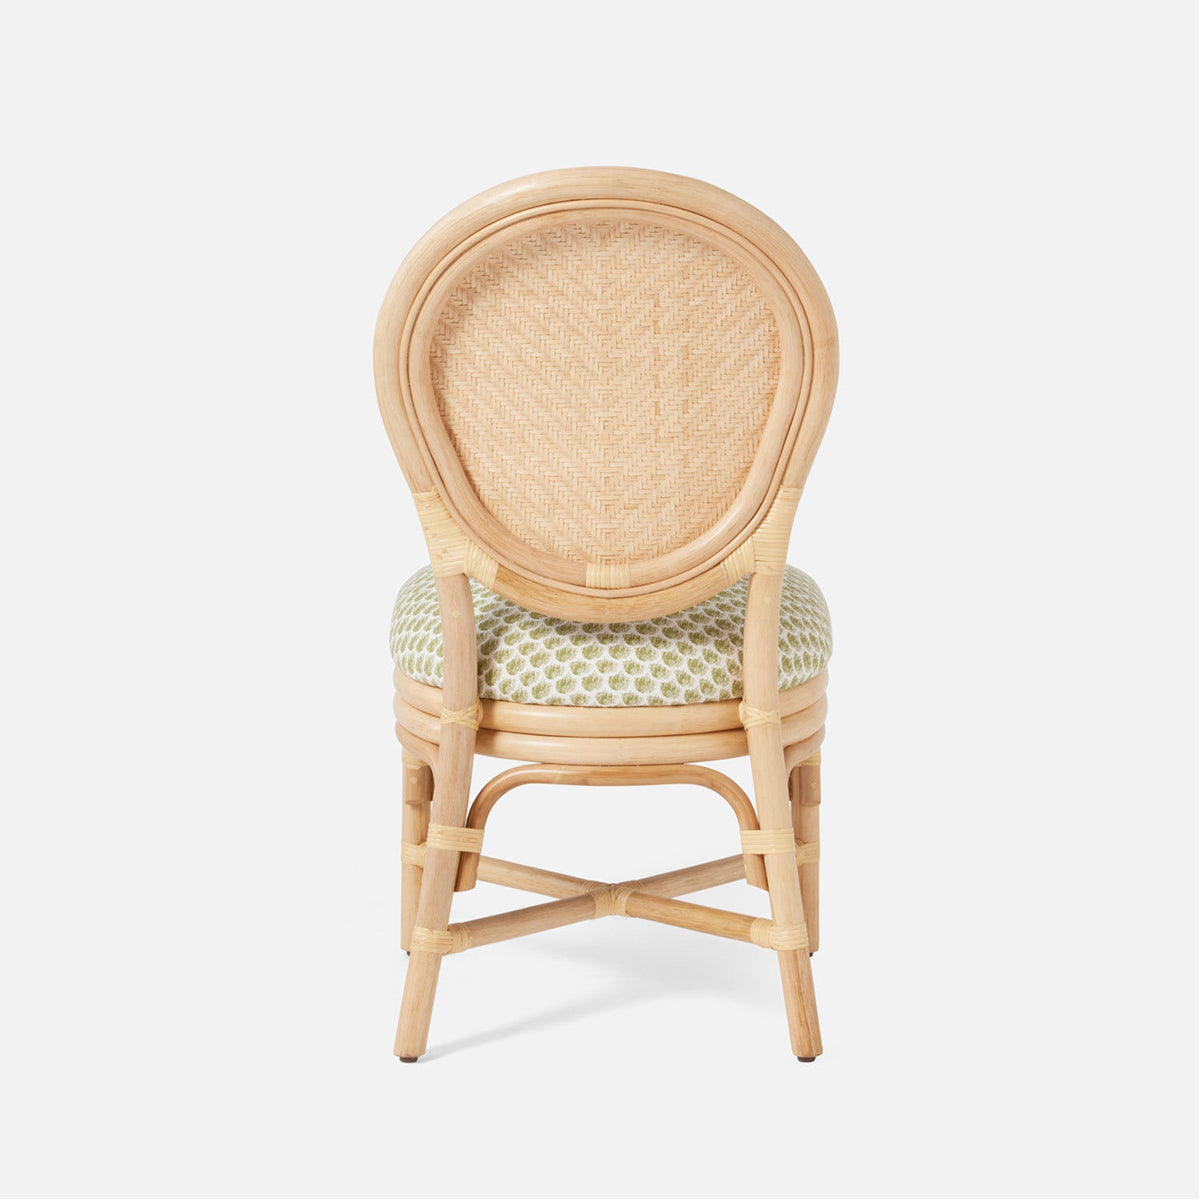 Made Goods Zondra French-Style Dining Chair in Brenta Cotton/Jute